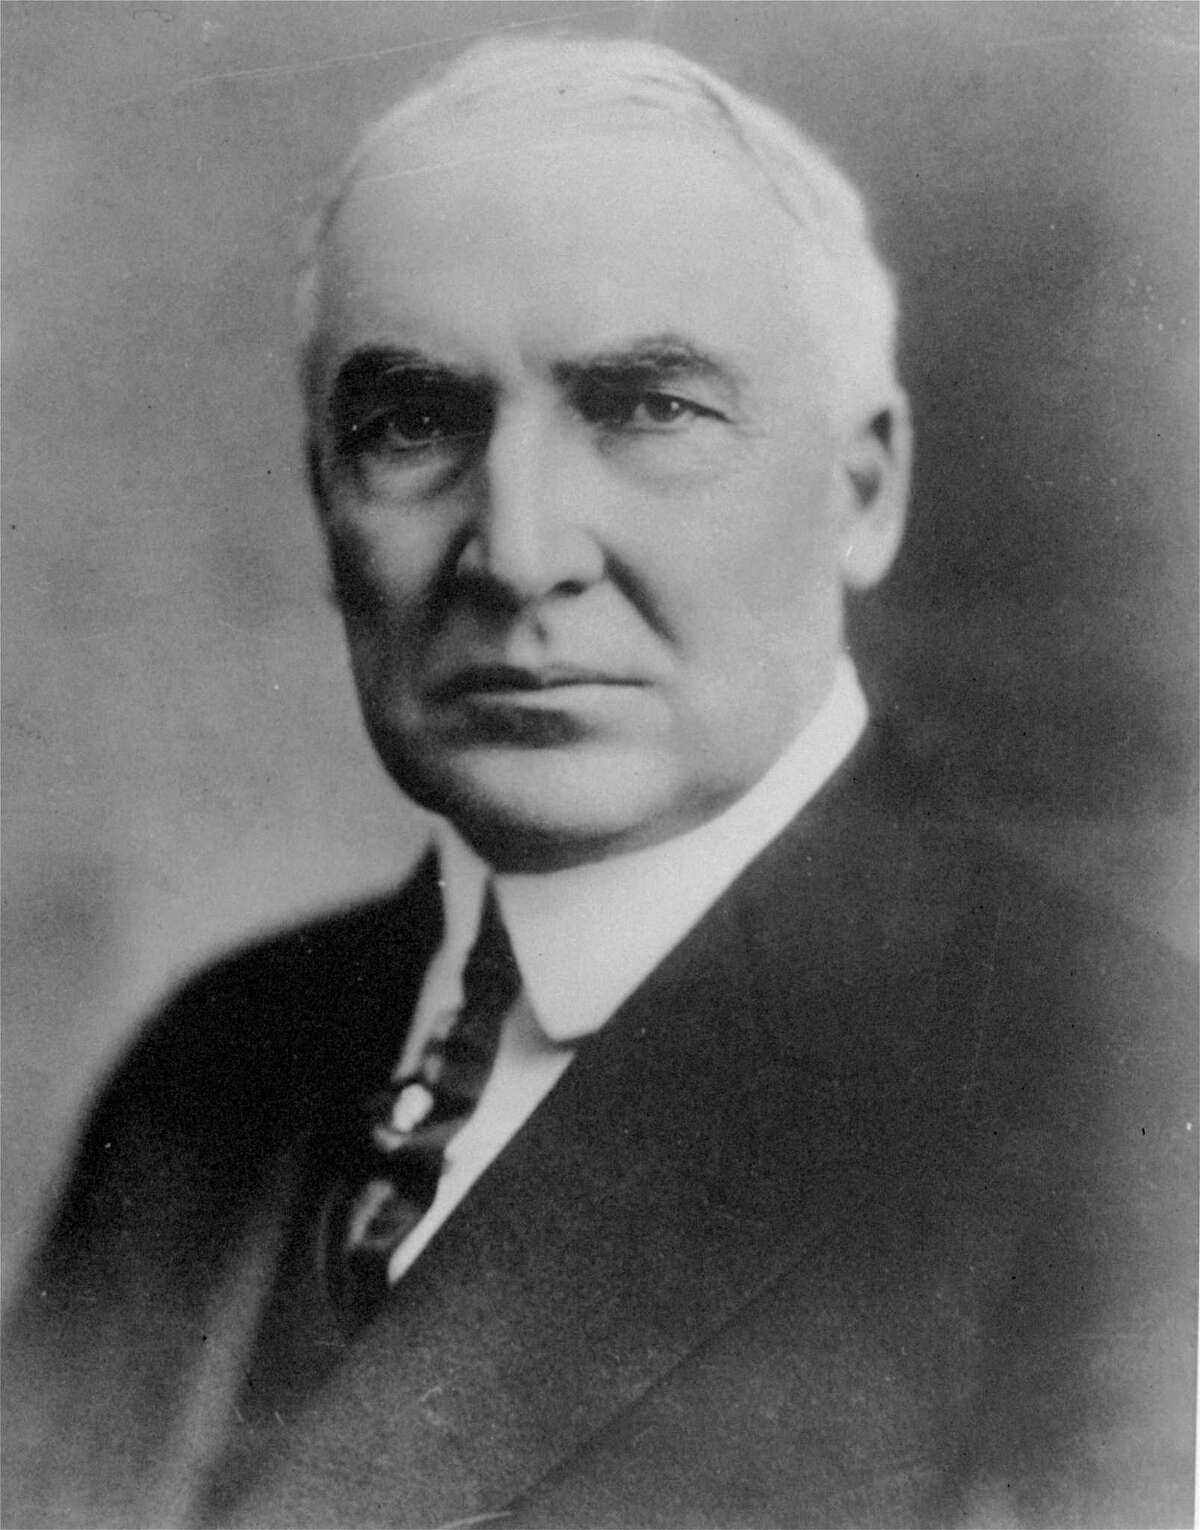 Warren G. Harding's administration was caught up in the Teapot Dome scandal.